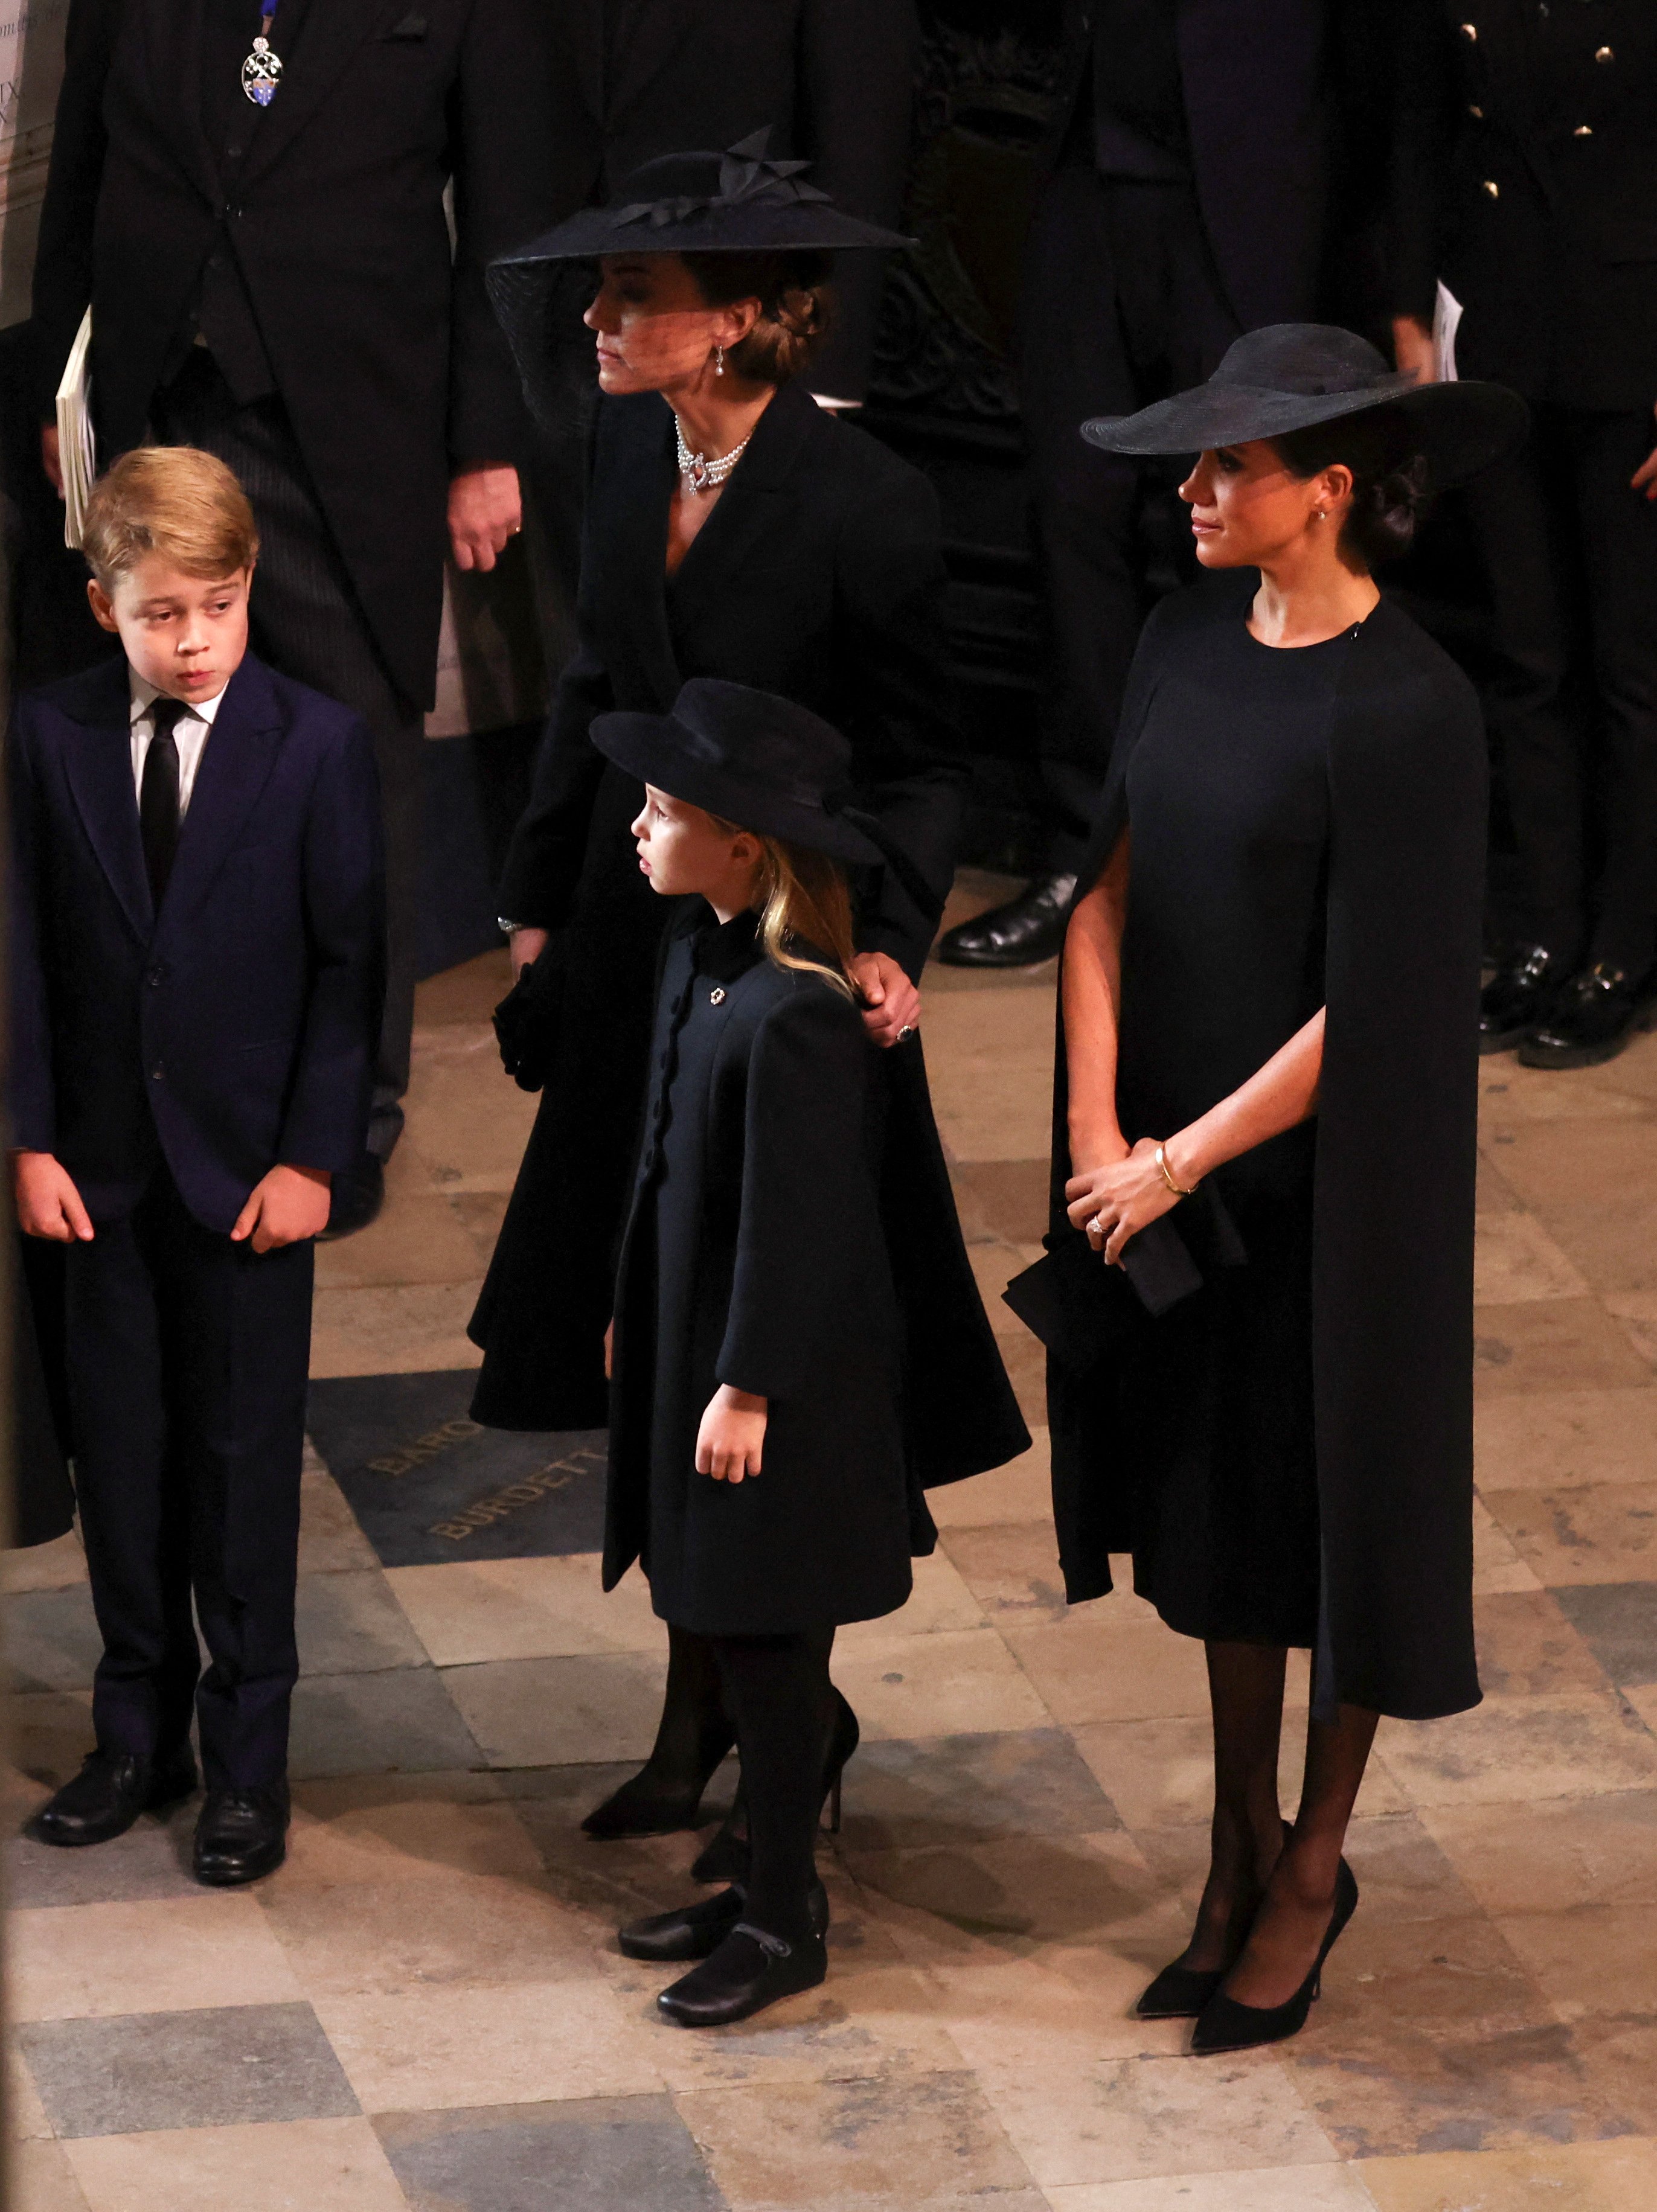 Catherine, Princess of Wales, Meghan, Duchess of Sussex, Prince George, and Princess Charlotte arrive at the State Funeral of Queen Elizabeth II, held at Westminster Abbey on September 19, 2022 in London, England. | Source: Getty Images